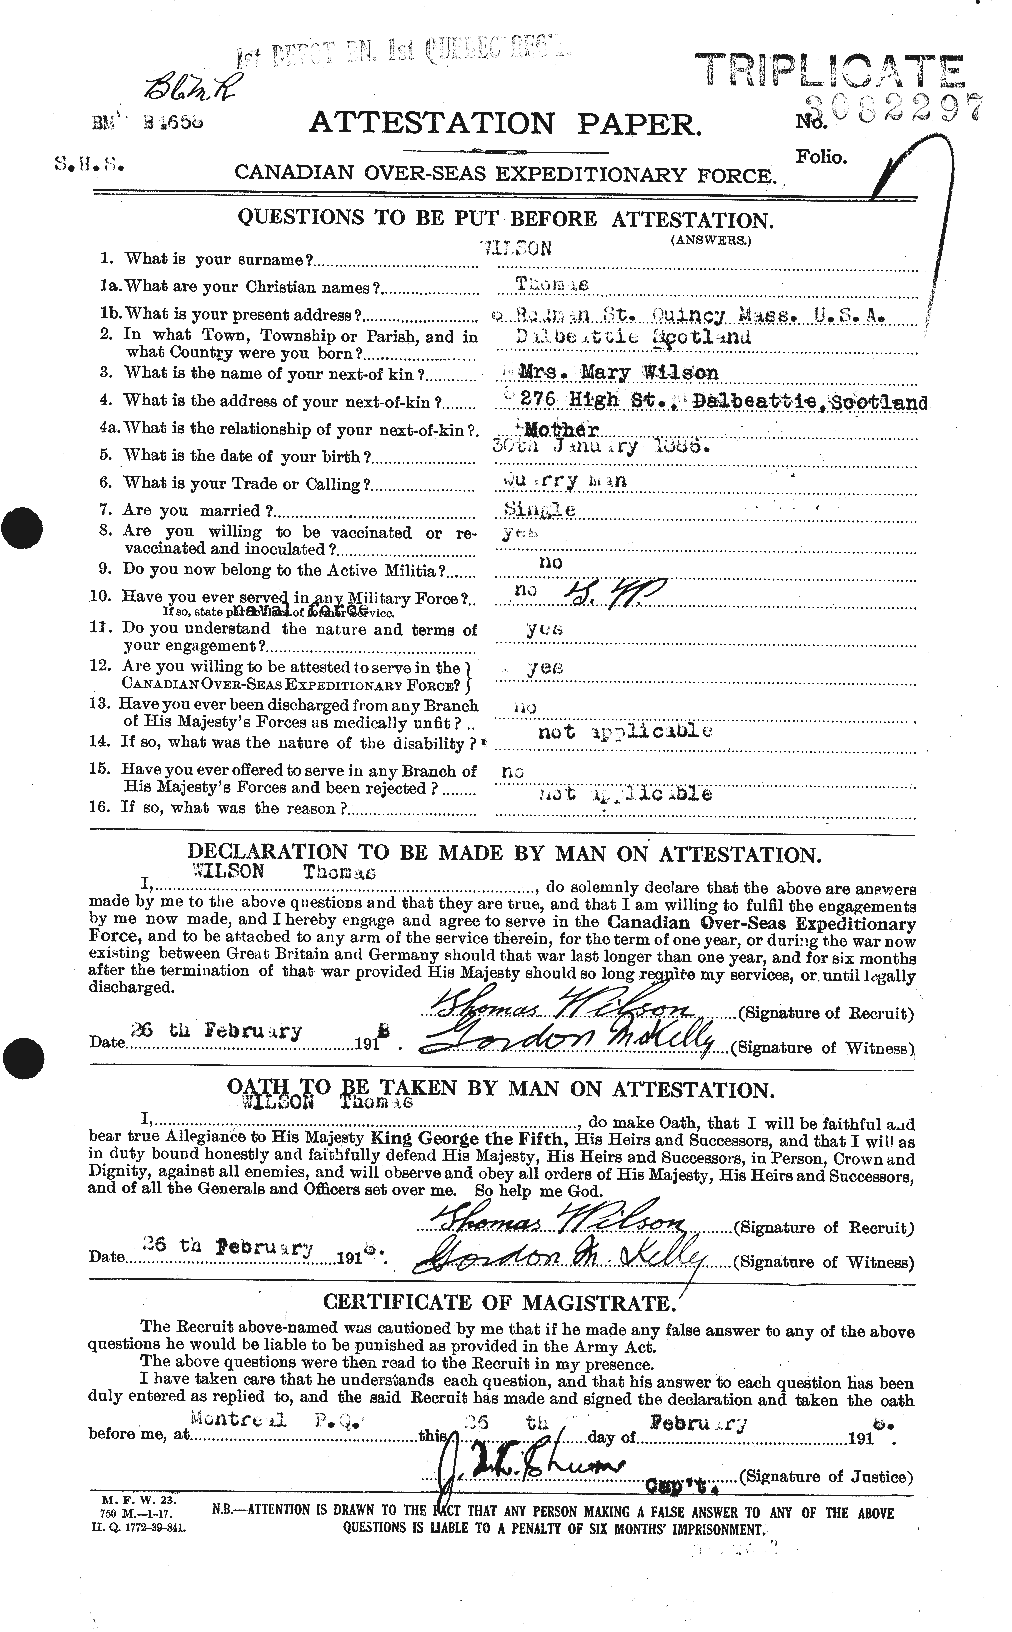 Personnel Records of the First World War - CEF 681211a